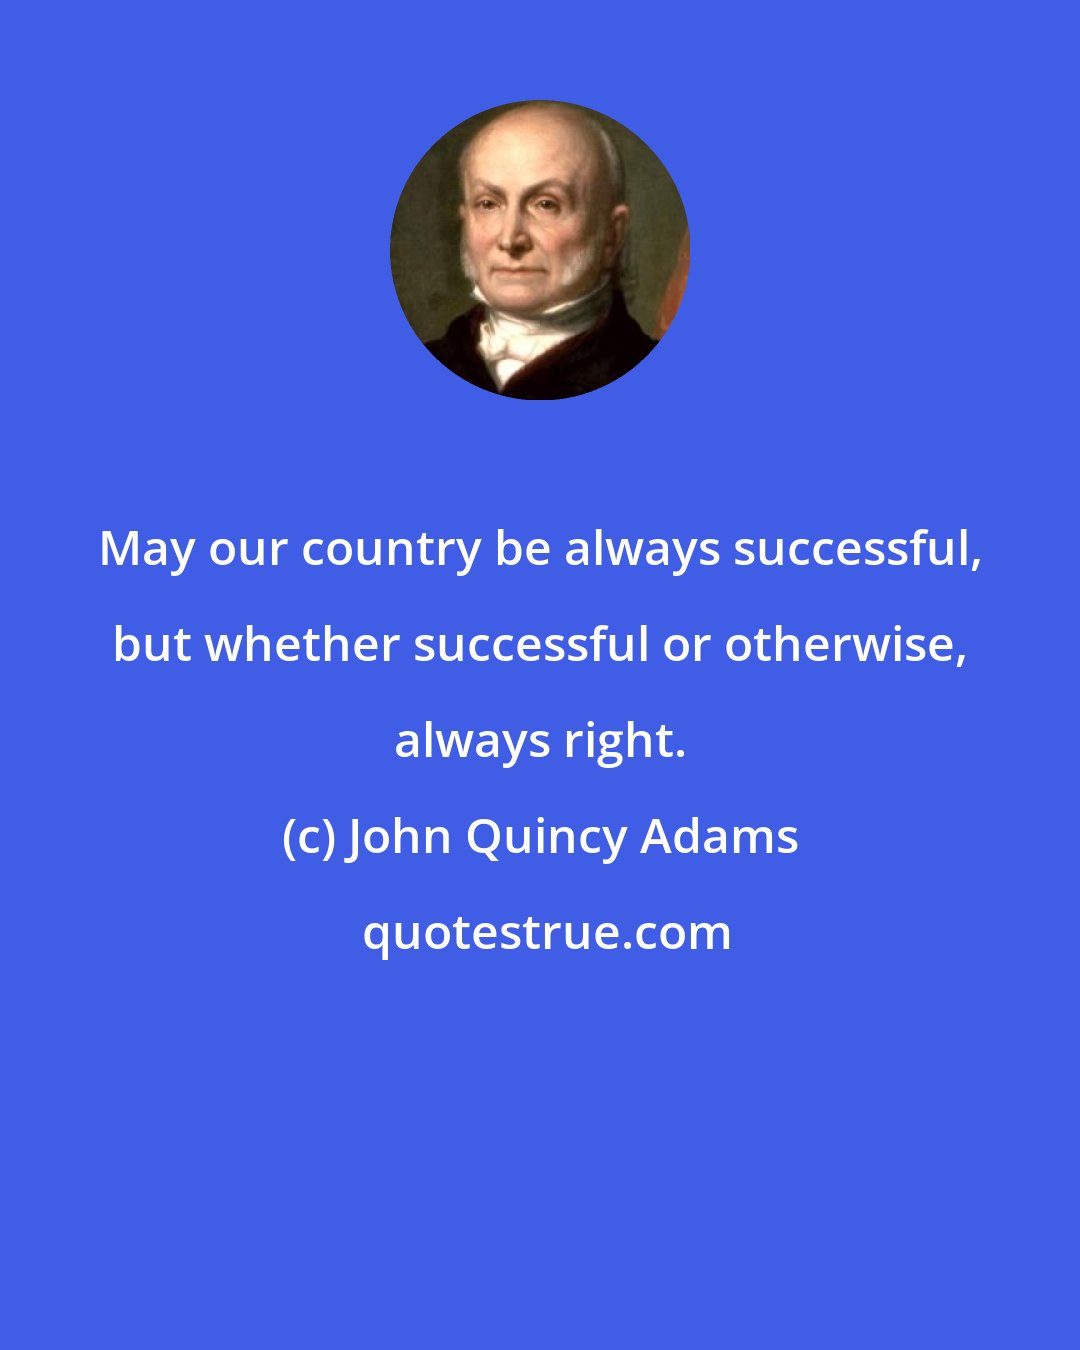 John Quincy Adams: May our country be always successful, but whether successful or otherwise, always right.